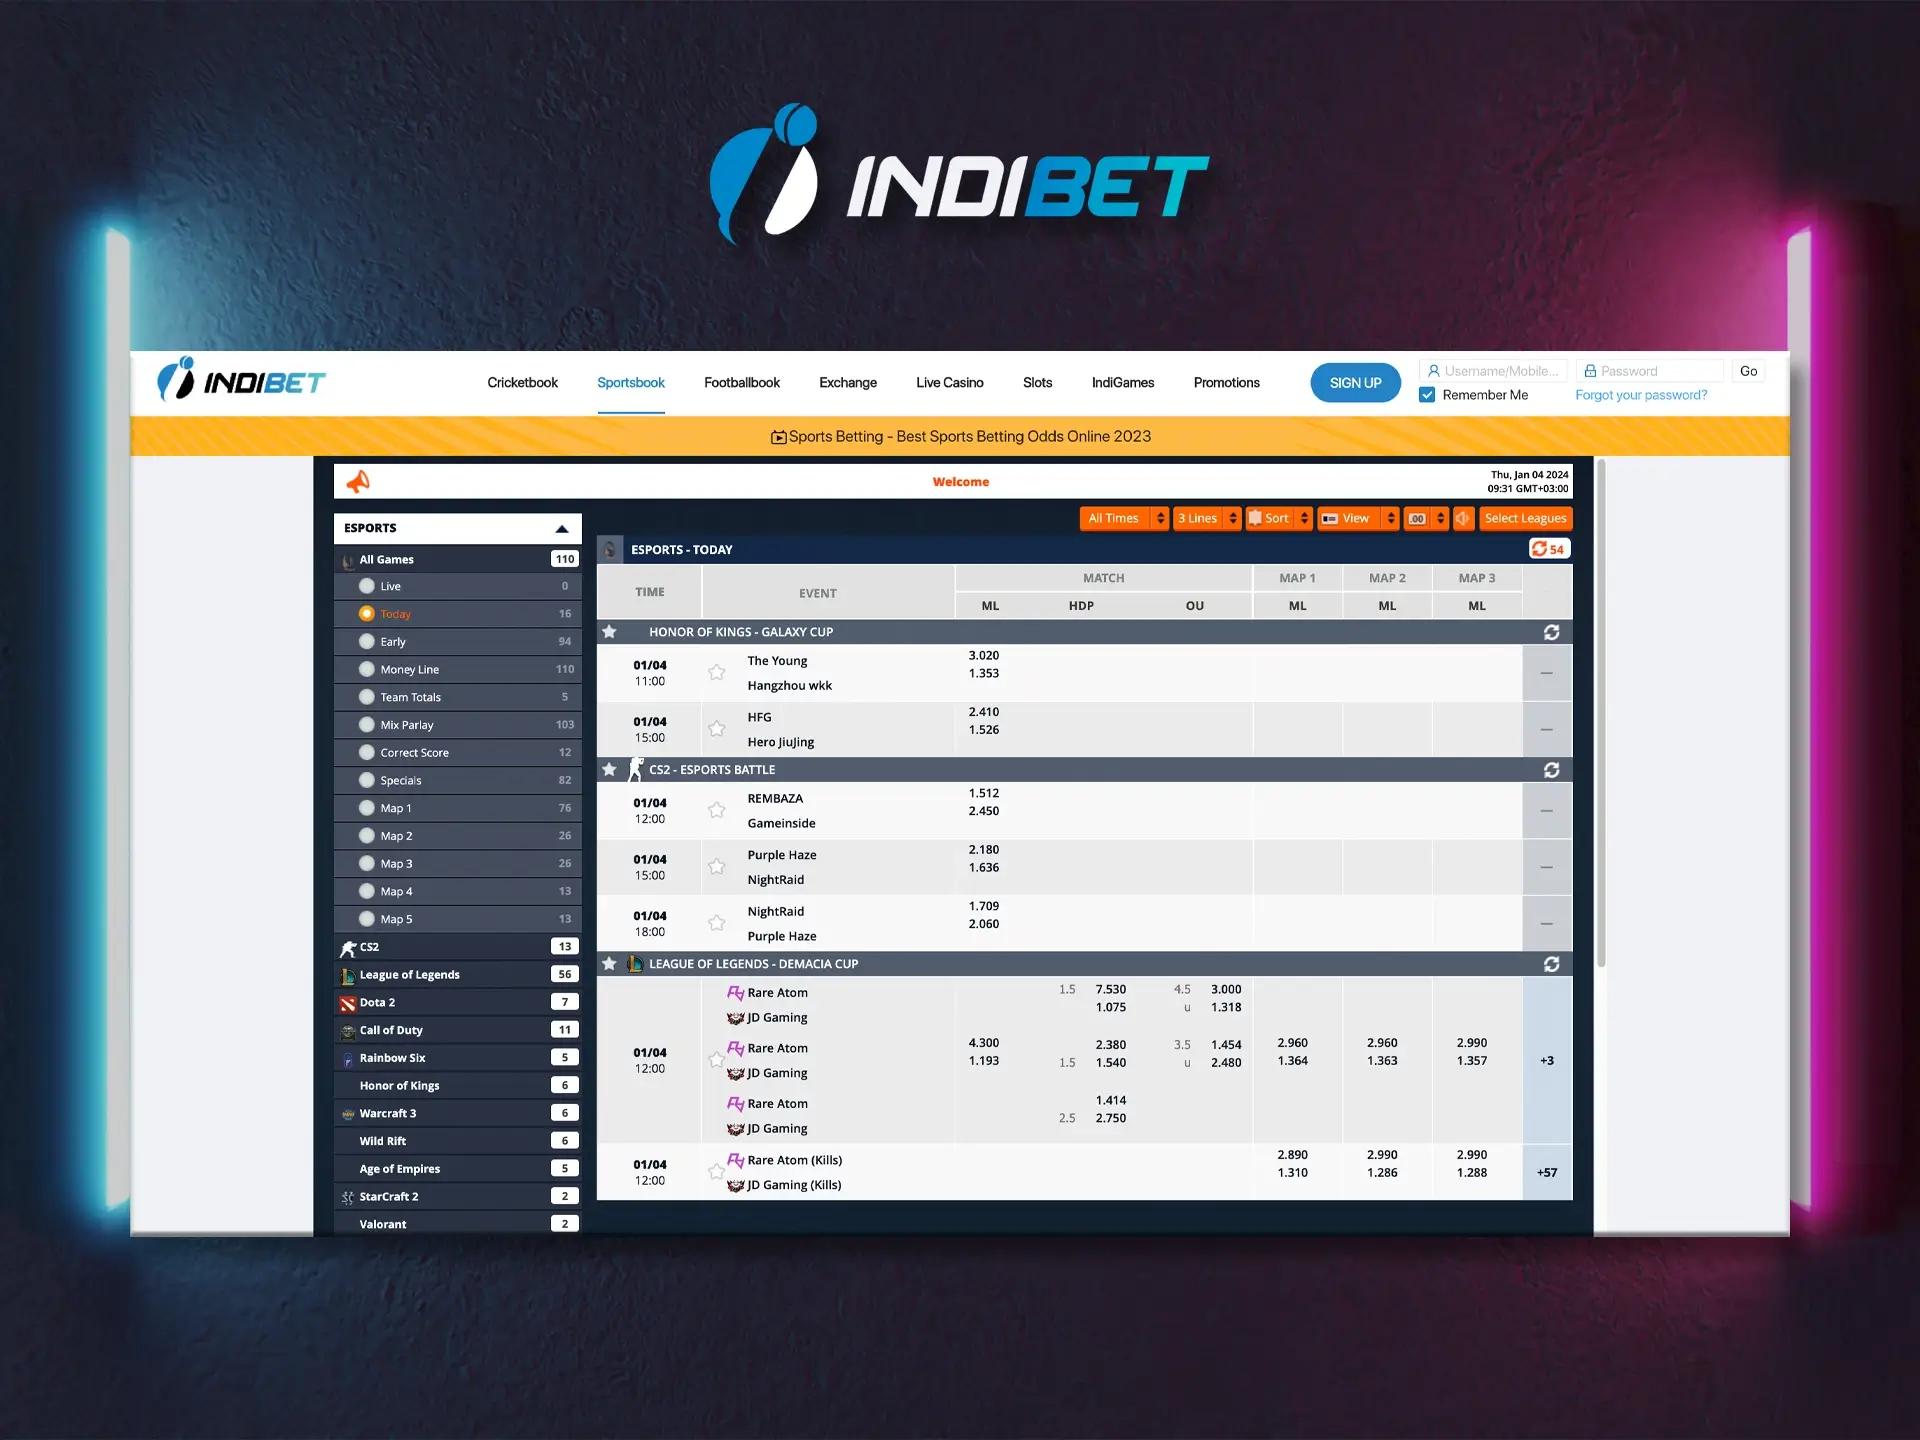 Indibet is known to users for its large selection of cyber sports disciplines.